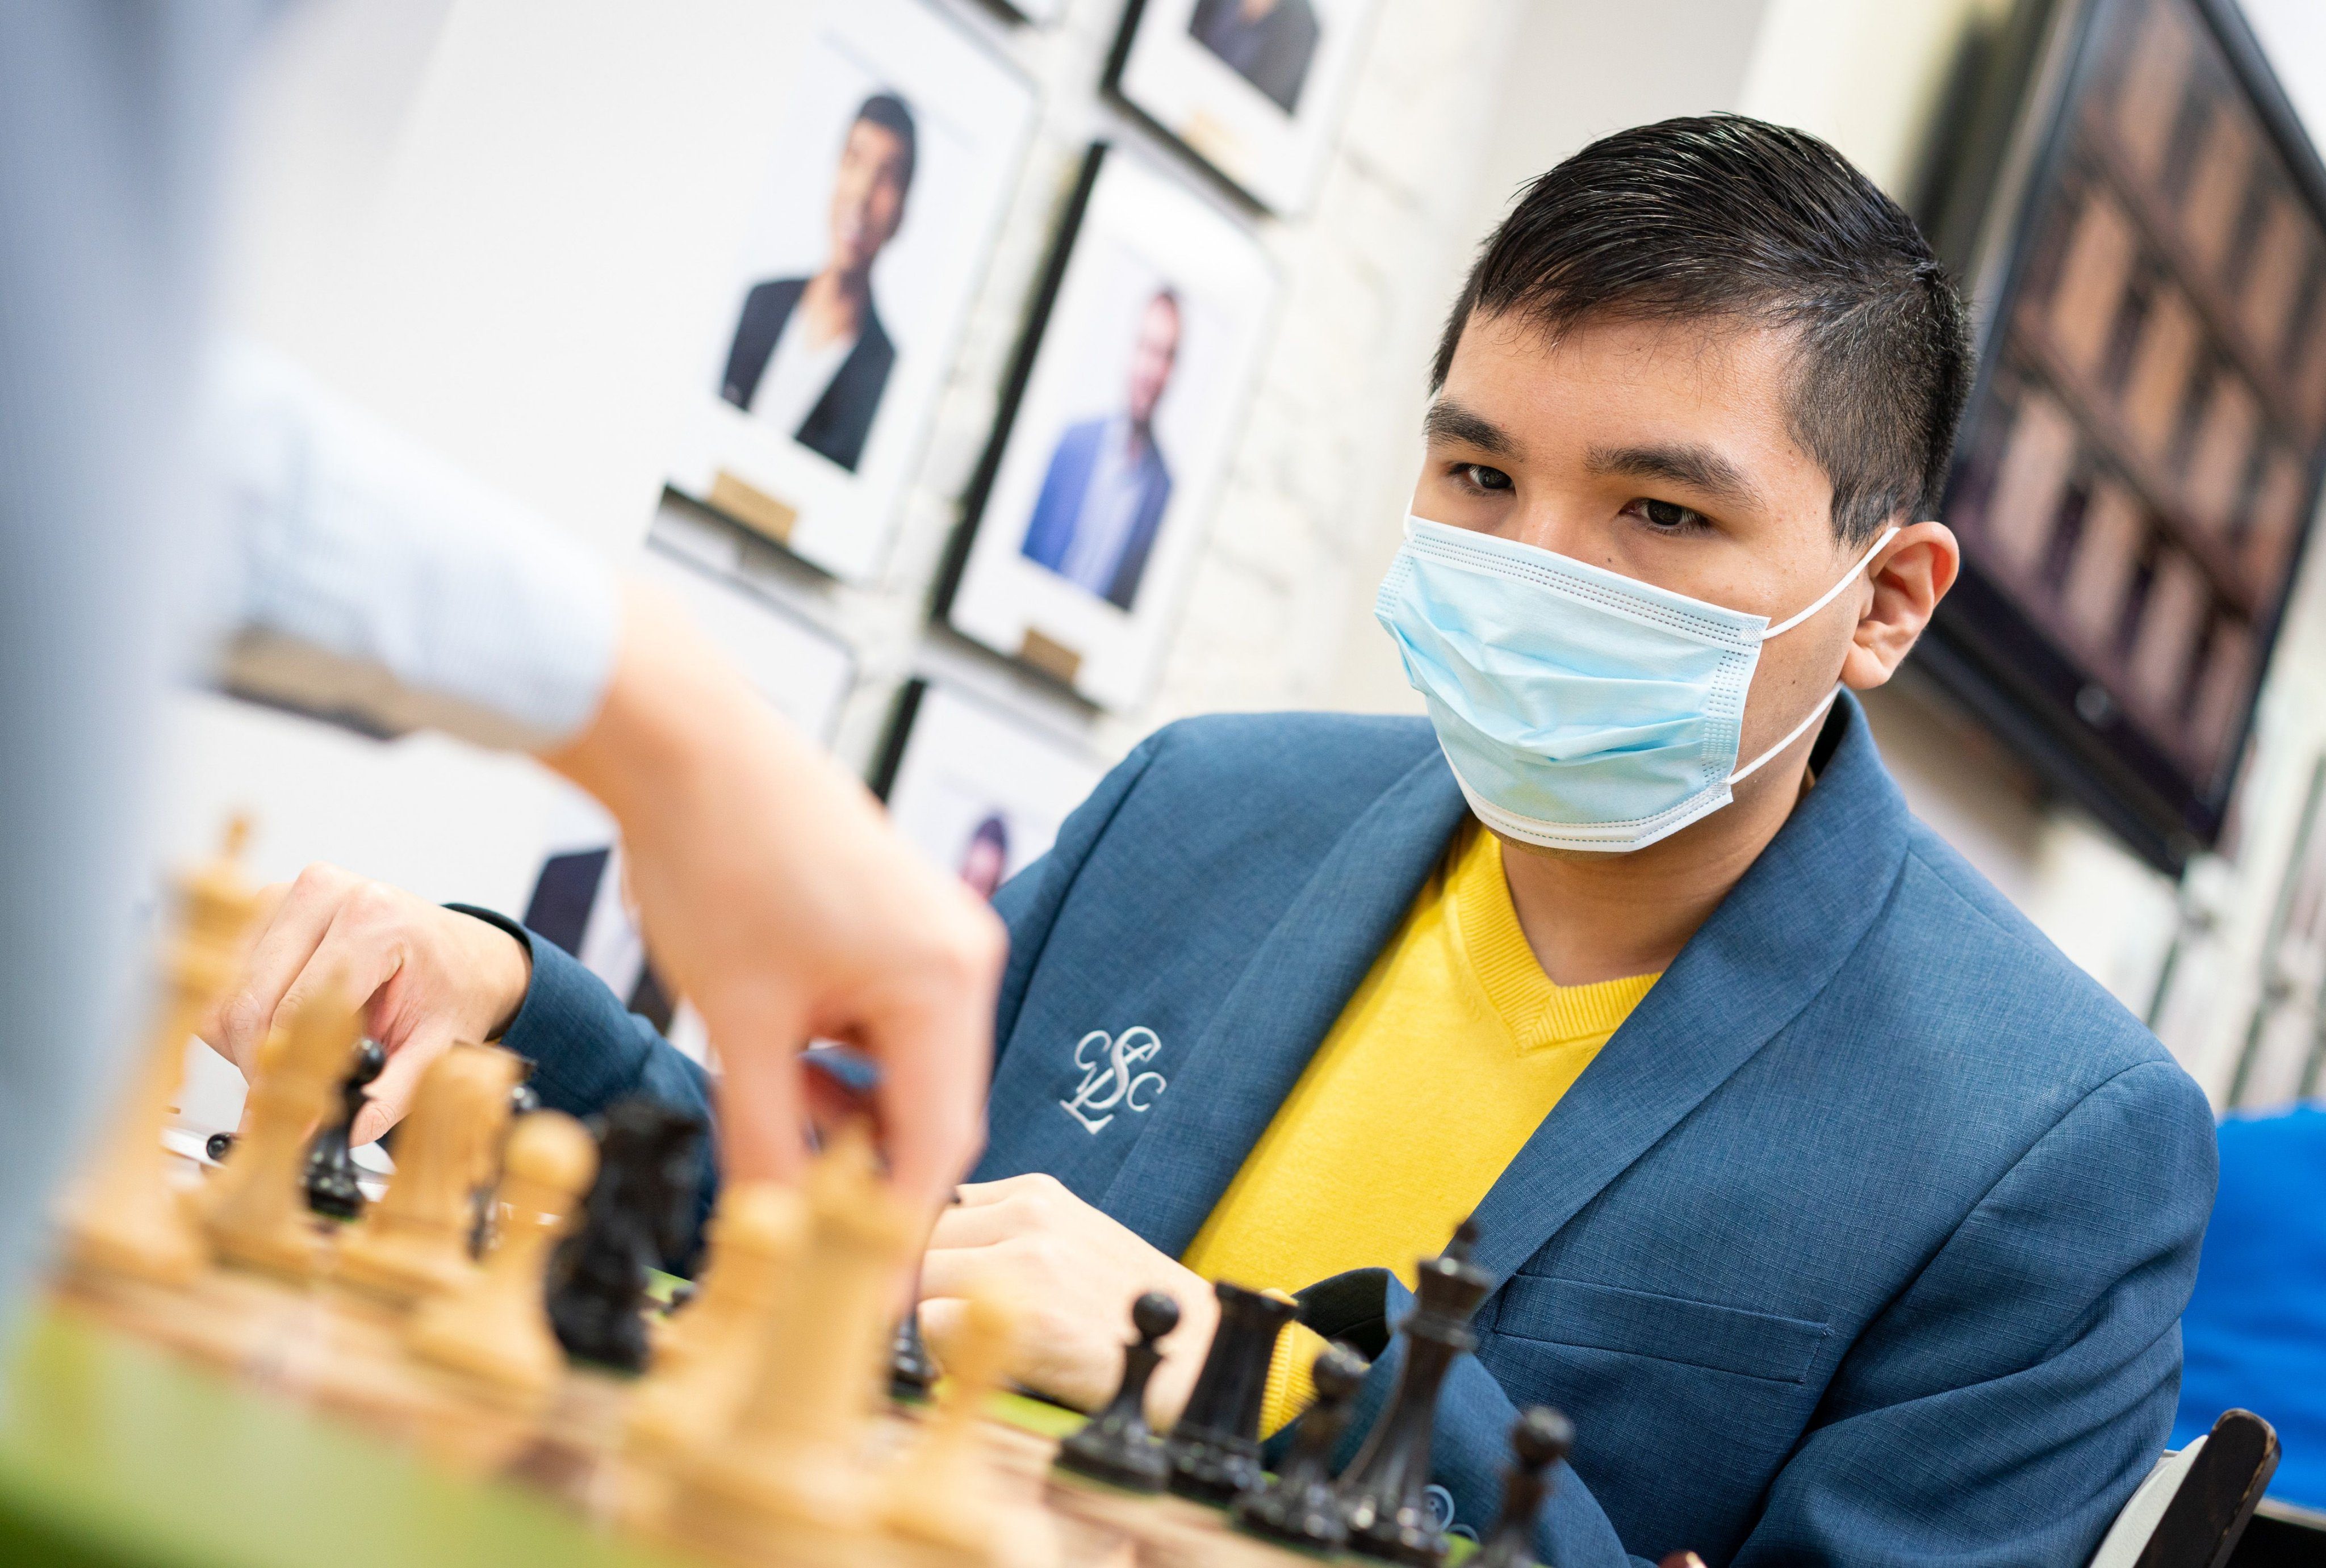 Wesley So: A Filipino-Born Chess Master, Becomes an American